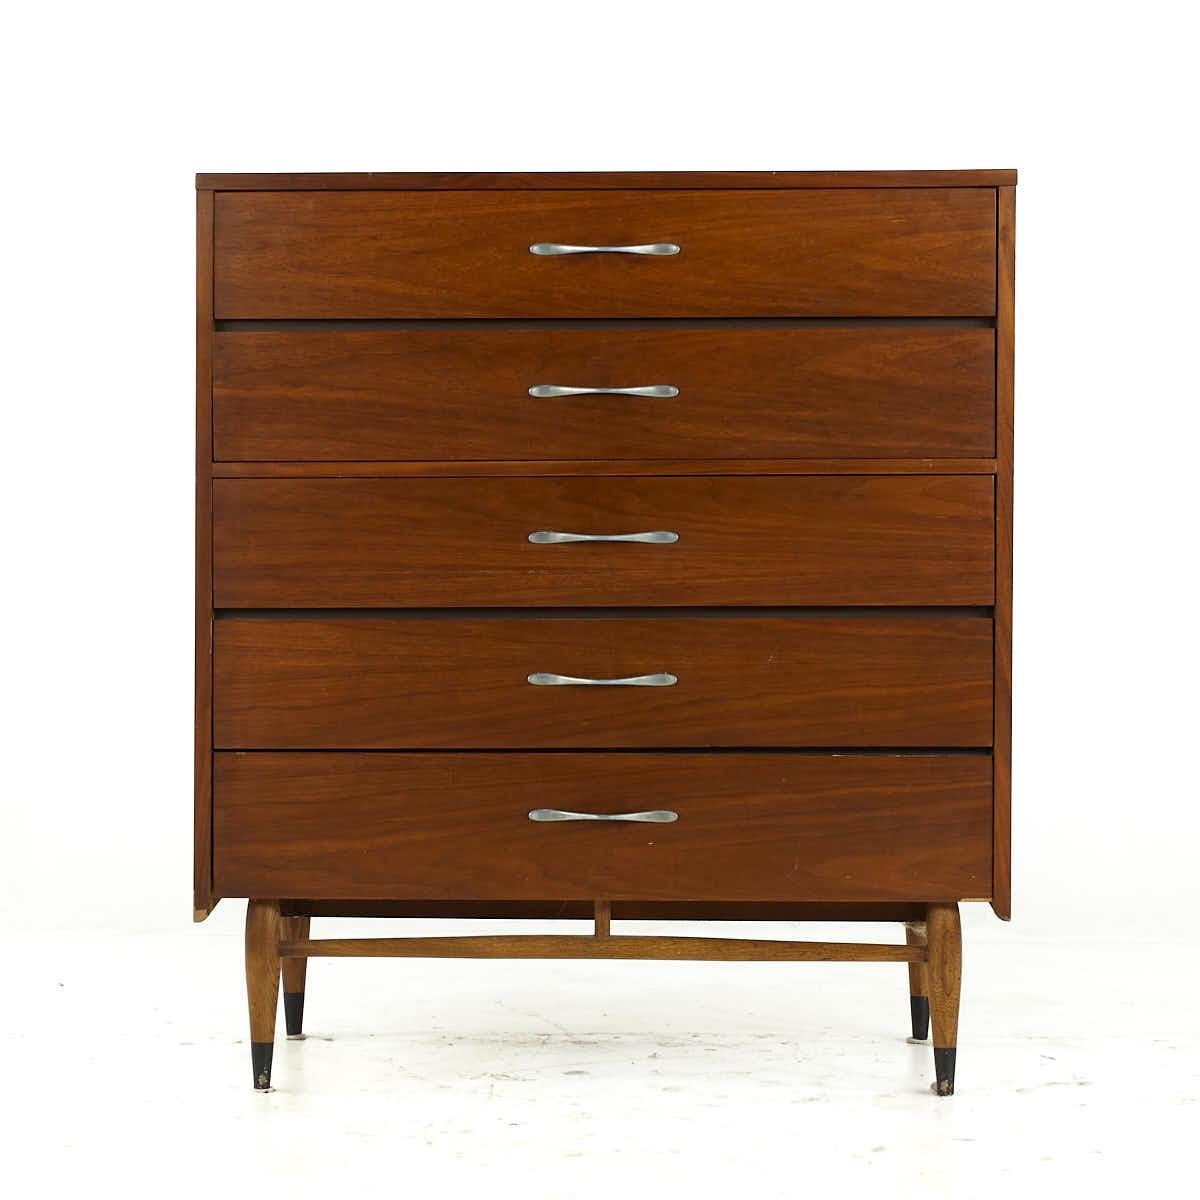 Lane Acclaim Mid Century Walnut Highboy Dresser

This highboy measures: 38 wide x 18 deep x 43 inches high

All pieces of furniture can be had in what we call restored vintage condition. That means the piece is restored upon purchase so it’s free of